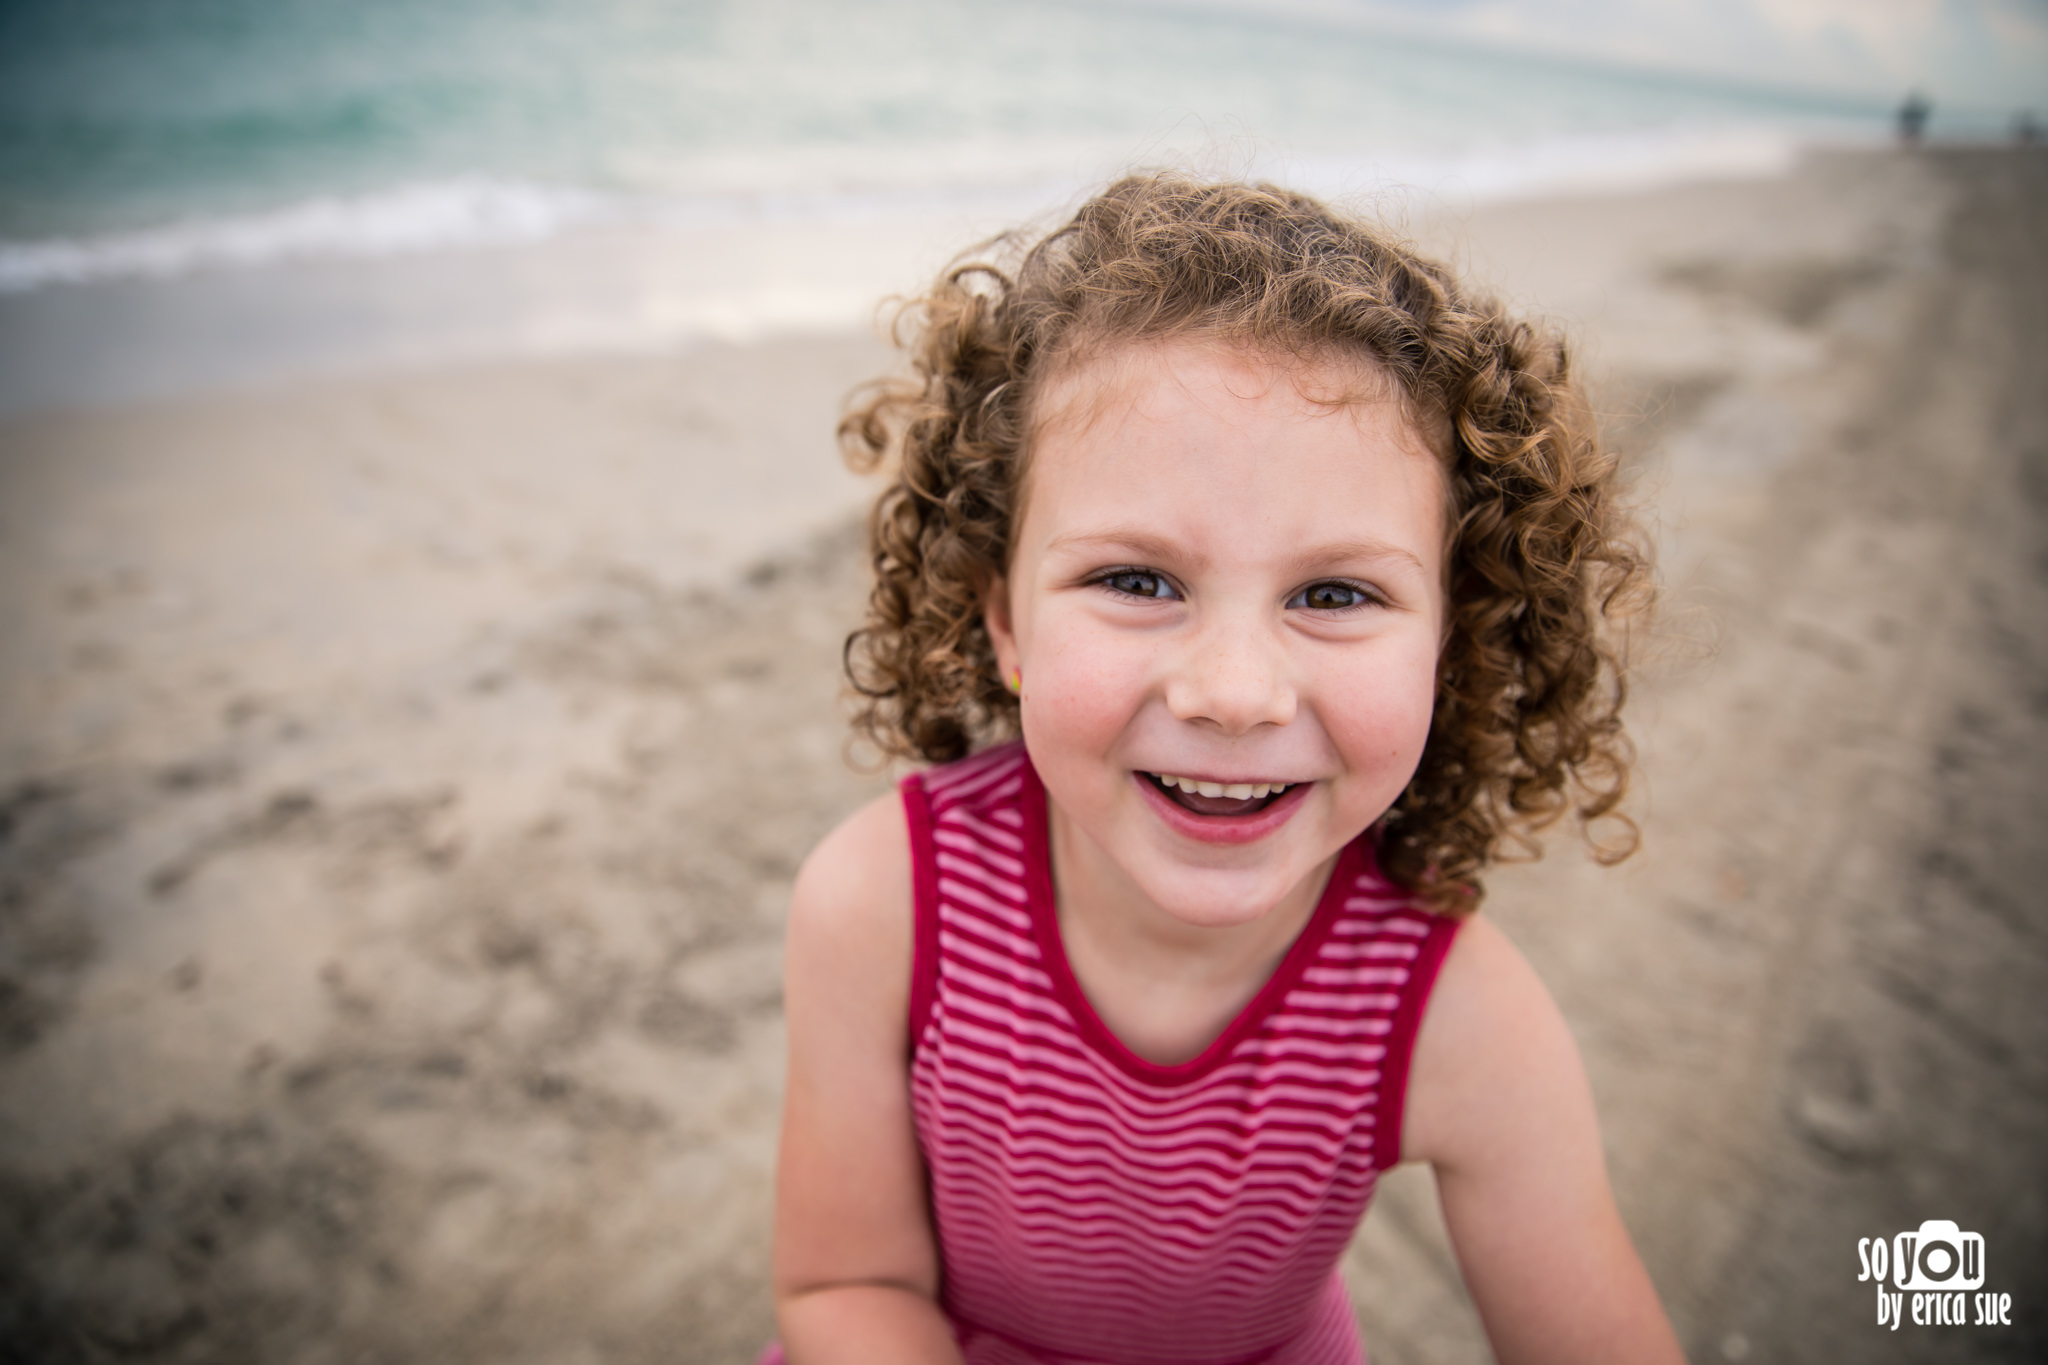 so-you-by-erica-sue-hollywood-beach-lifestyle-family-photographer-session-1142.JPG